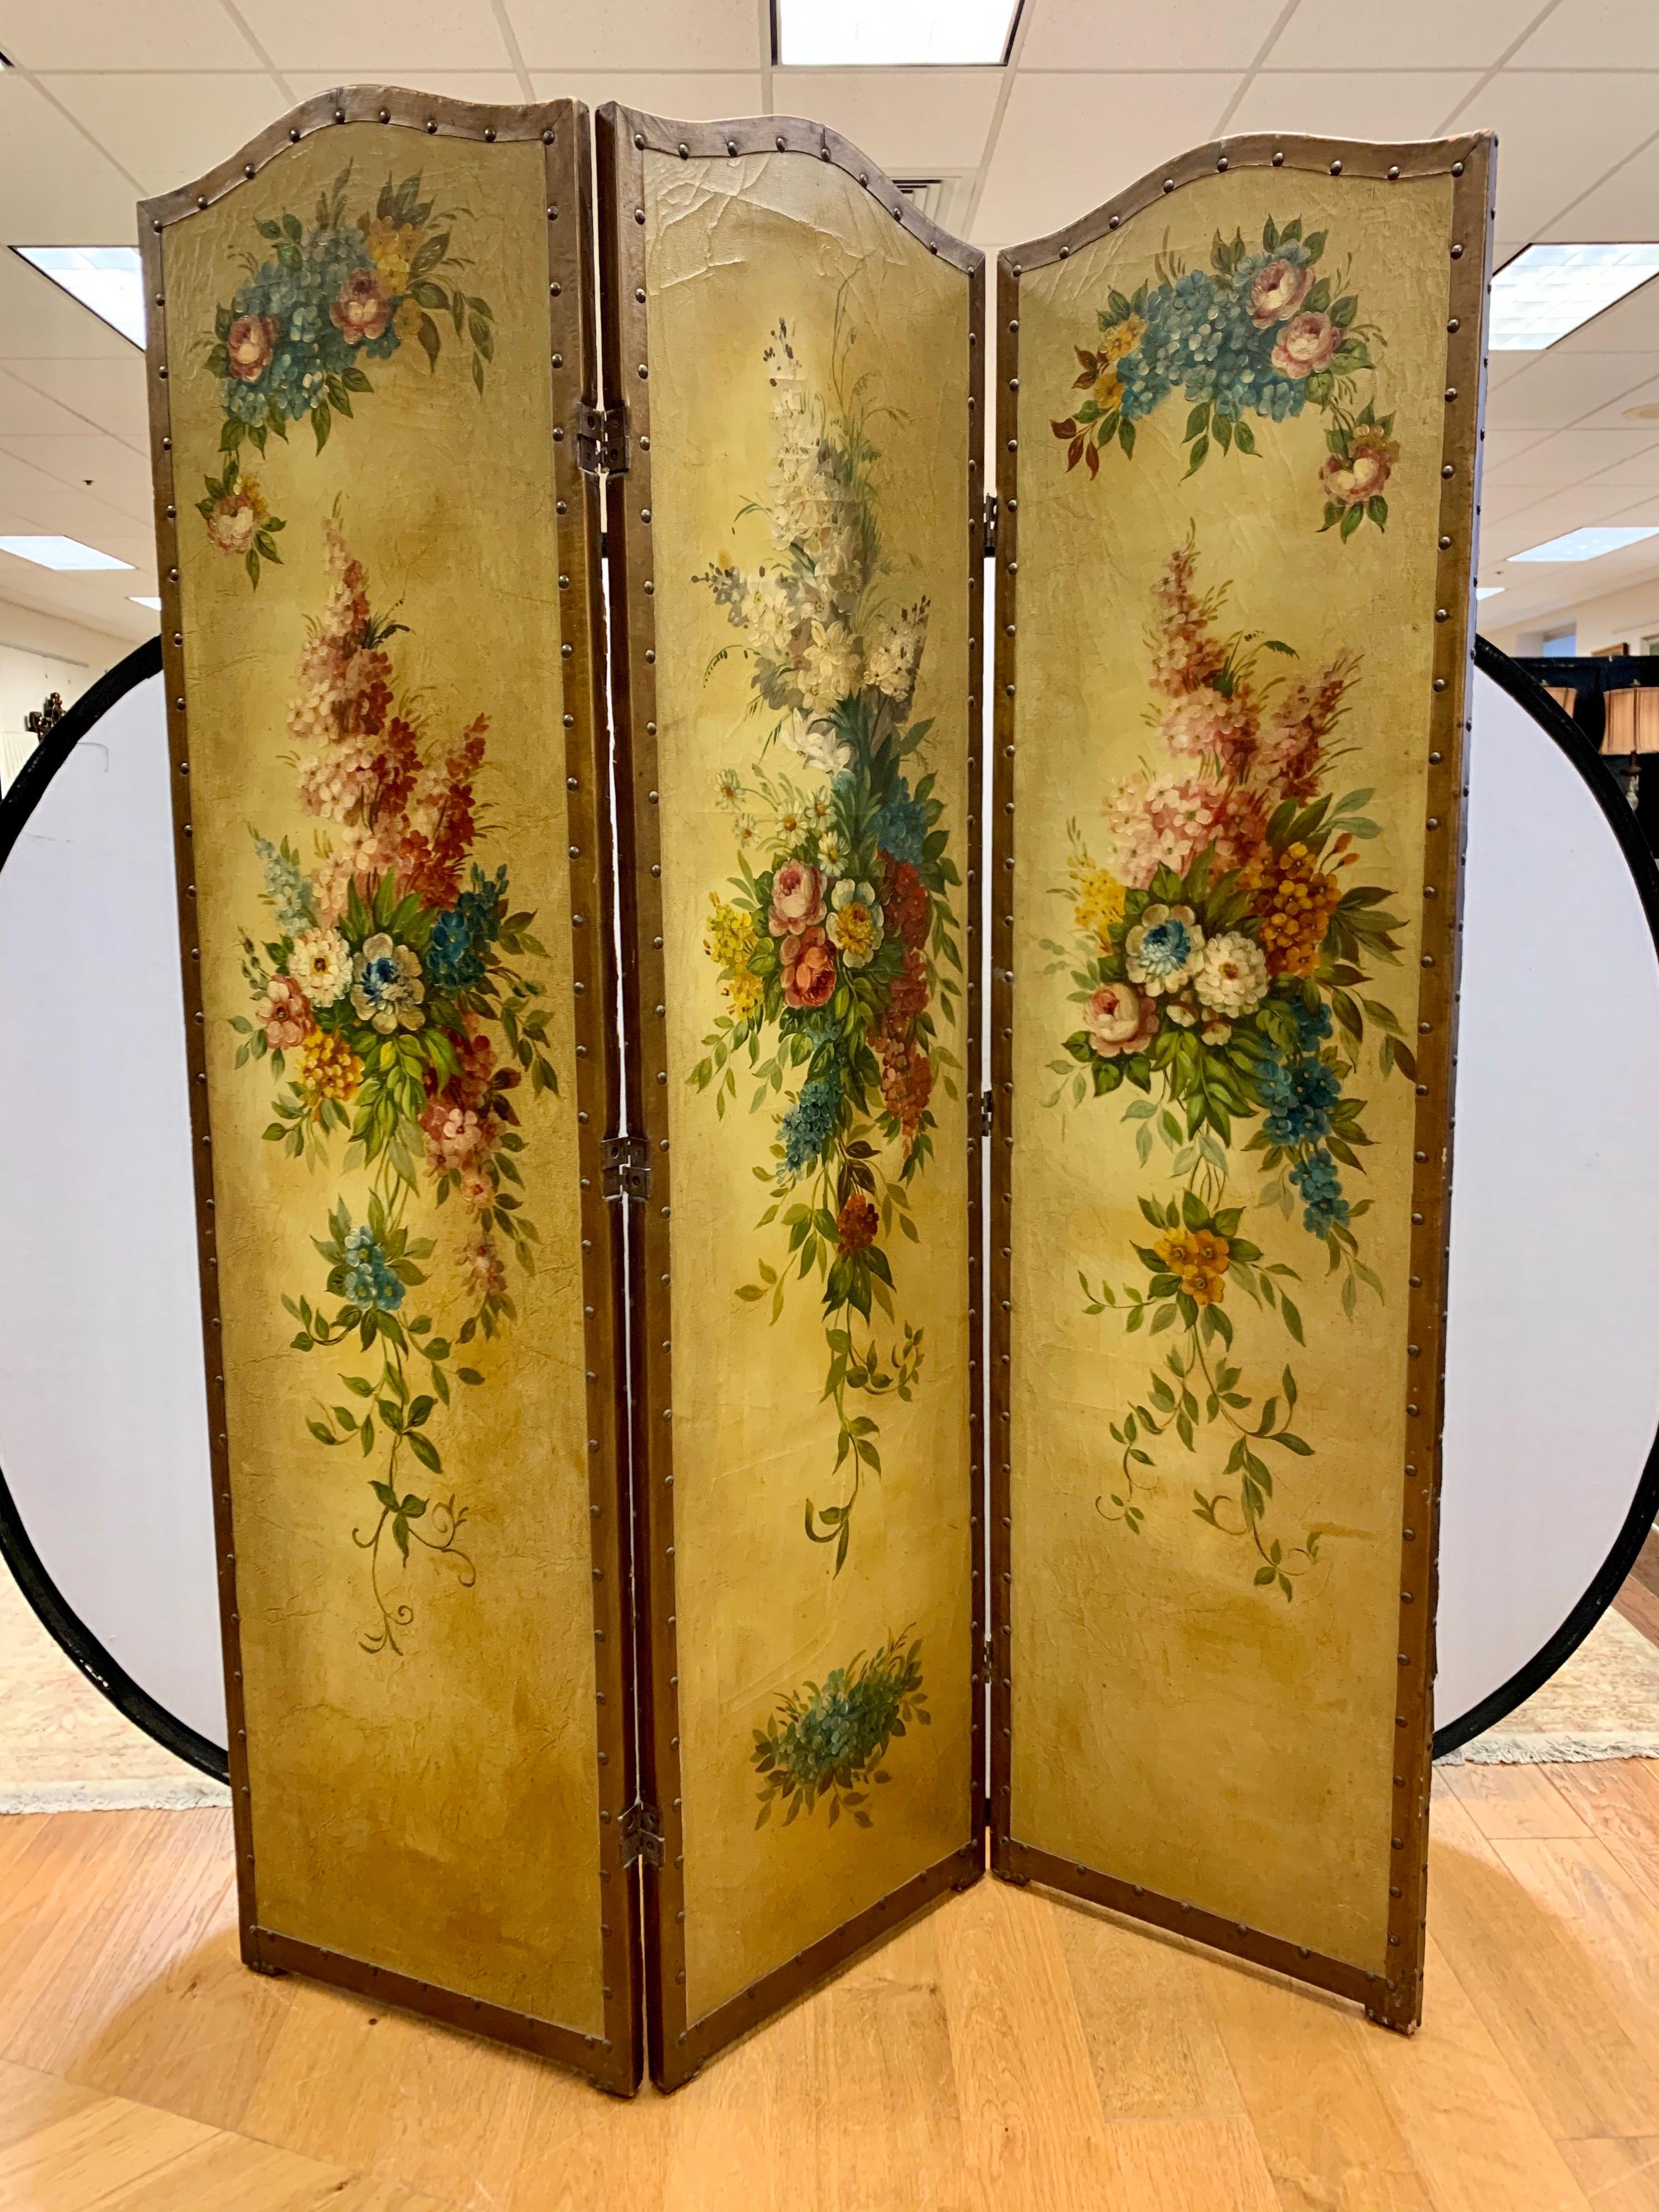 A very decorative French Louis XVI three panel painted screen. The three painted panels are bordered by antique nails over leather trim and are nothing short of magnificent. The whole screen is hand painted showing a large cascading floral scene on